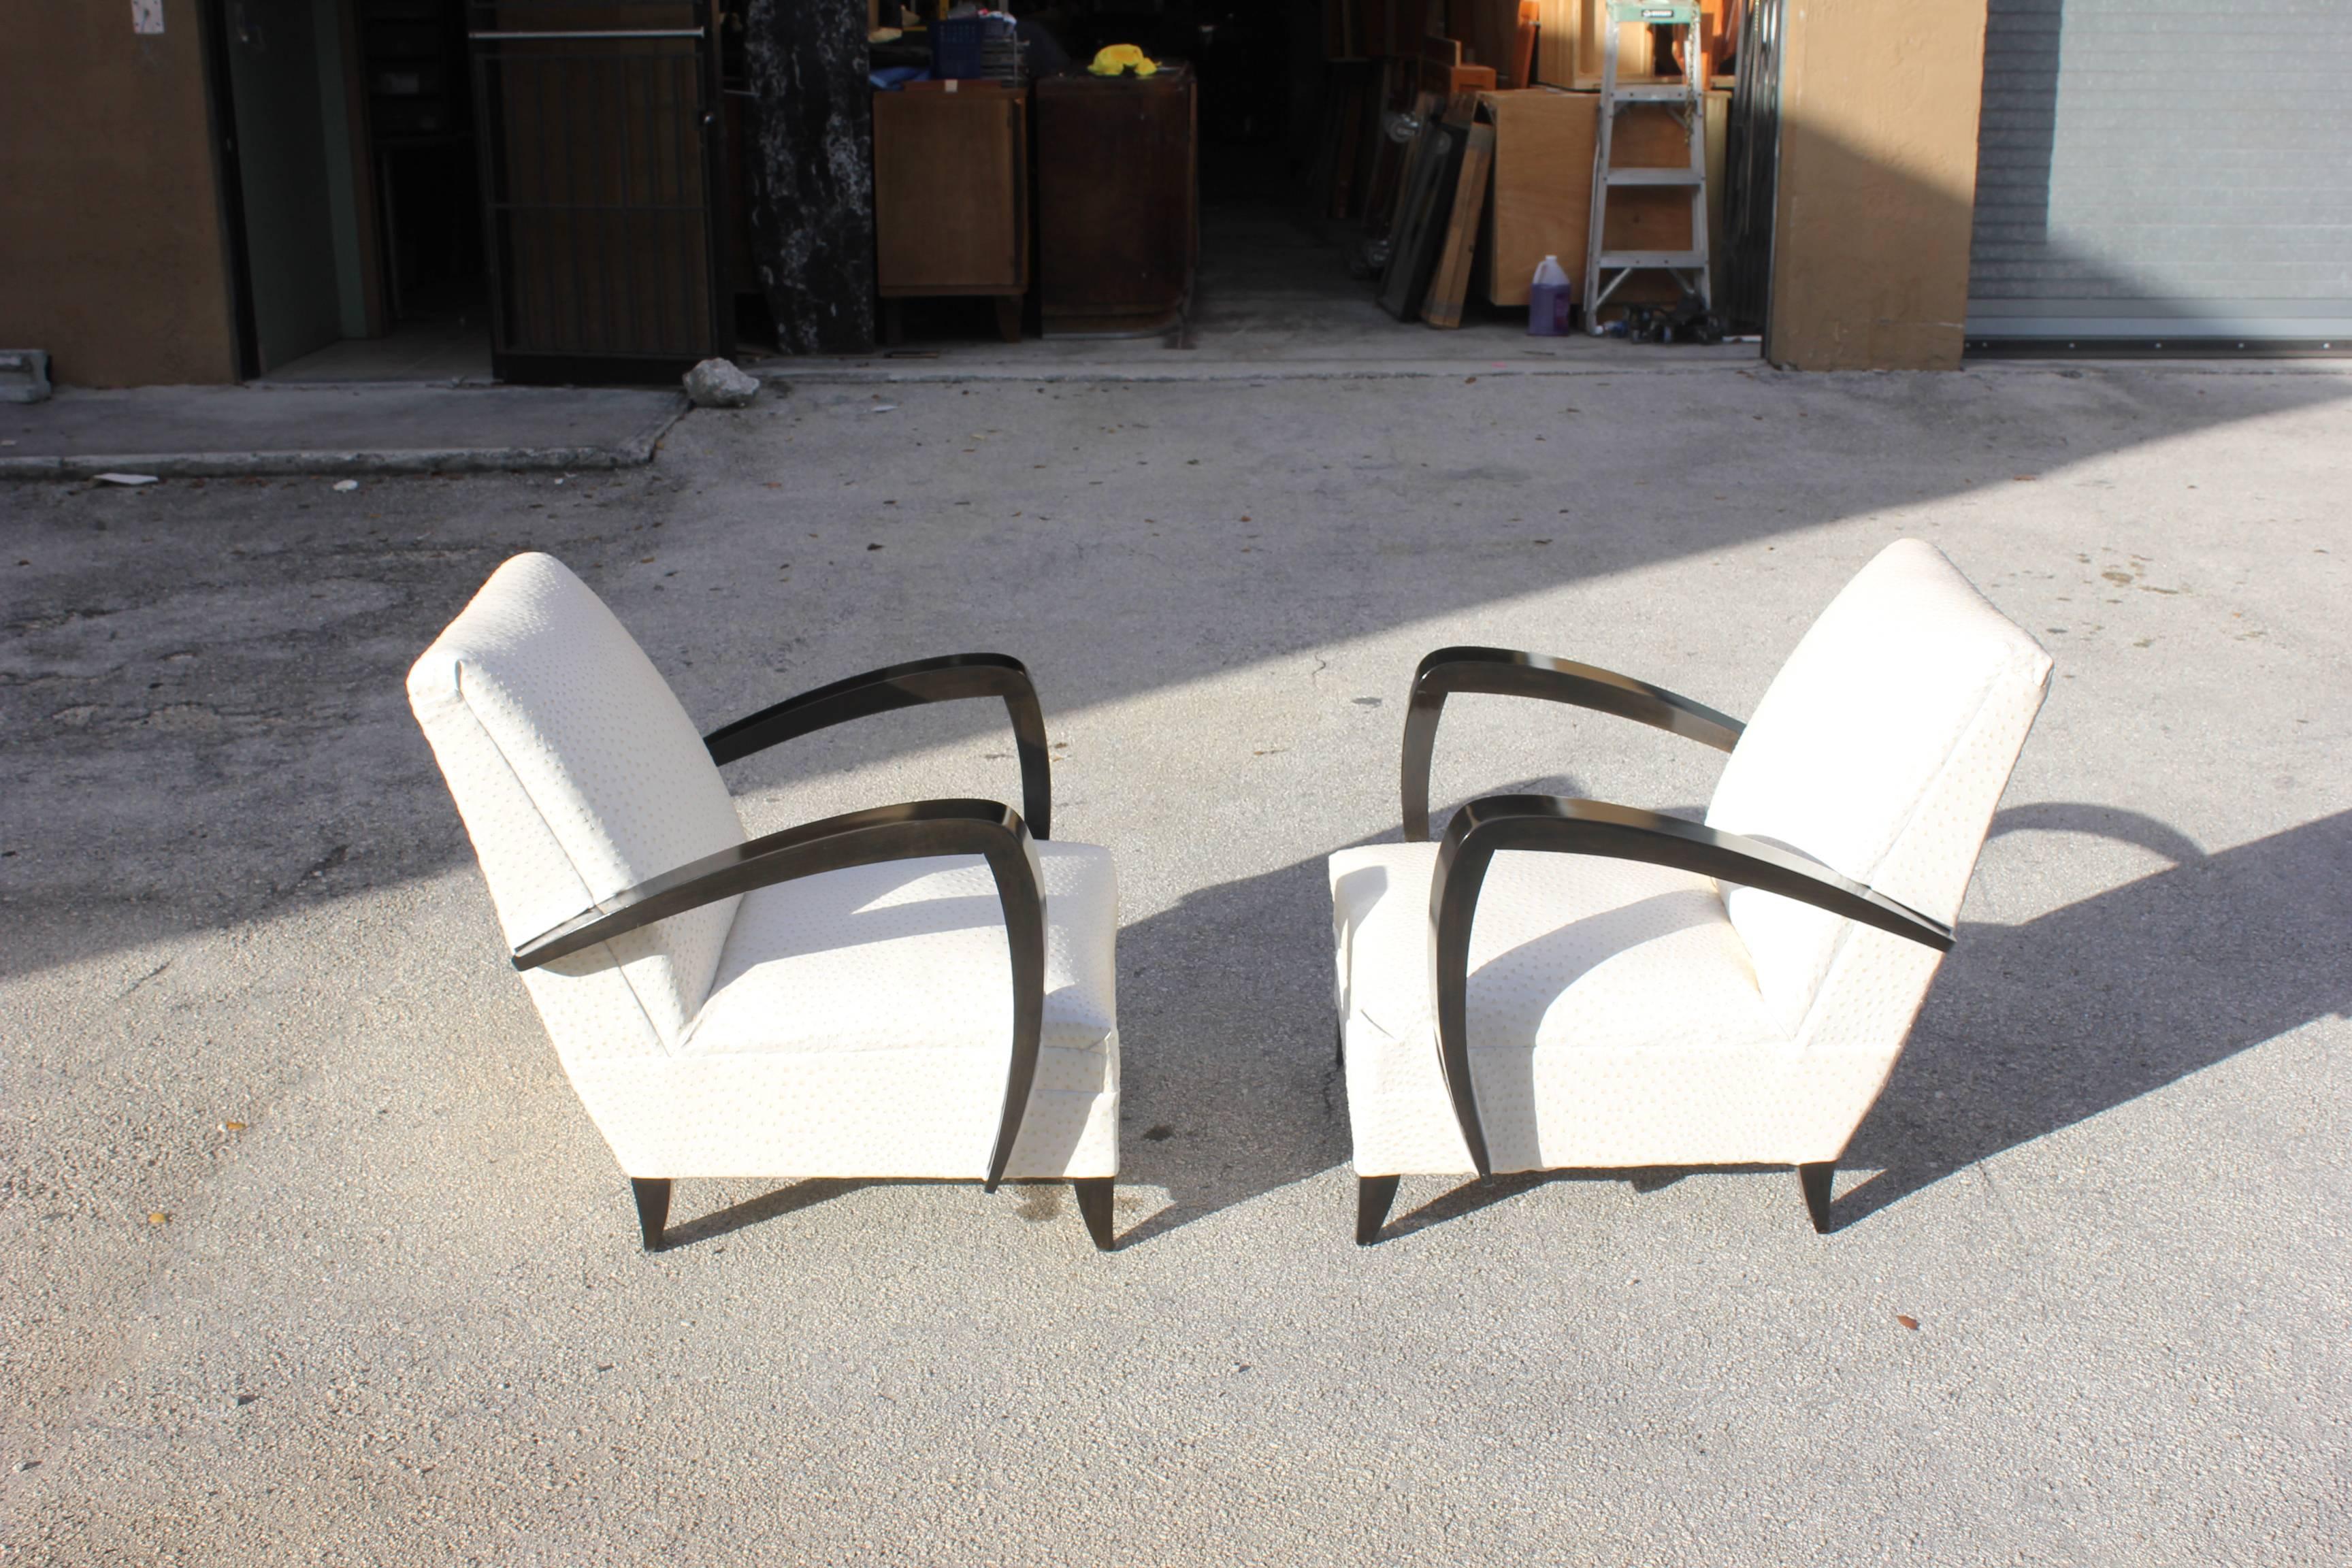 Elegant pair of French Art Deco armchairs or club or lounge chairs, new ostrich style textile Reupholstery and solid mahogany wood, outstanding high gloss finish. Attributed to Rene Prou designed, circa 1940.